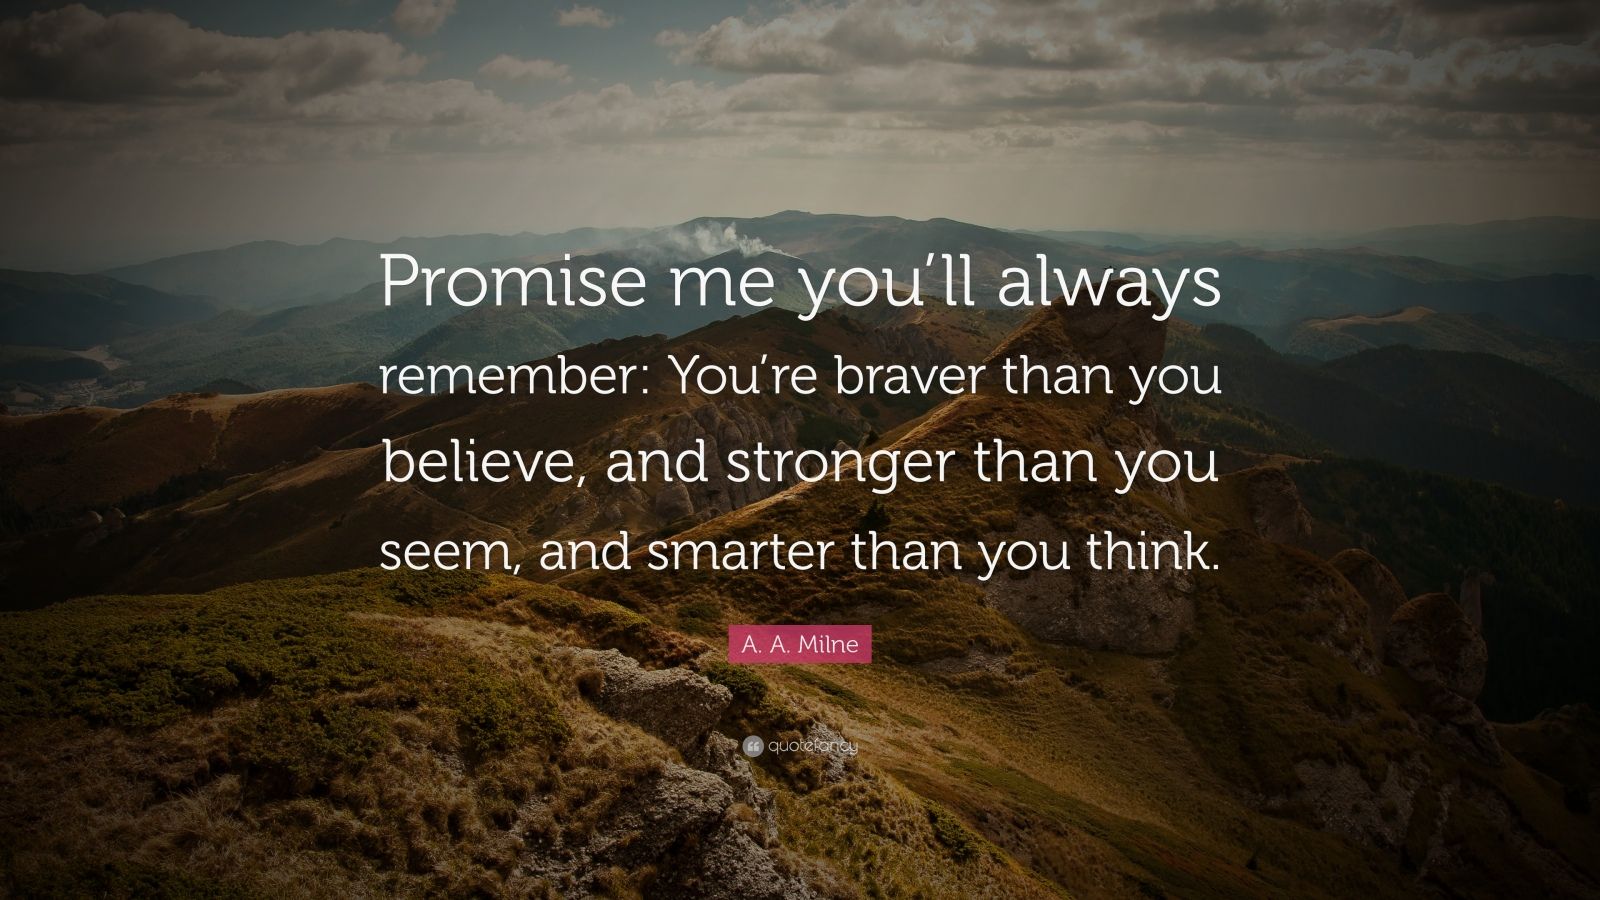 A. A. Milne Quote: “Promise me you’ll always remember: You’re braver